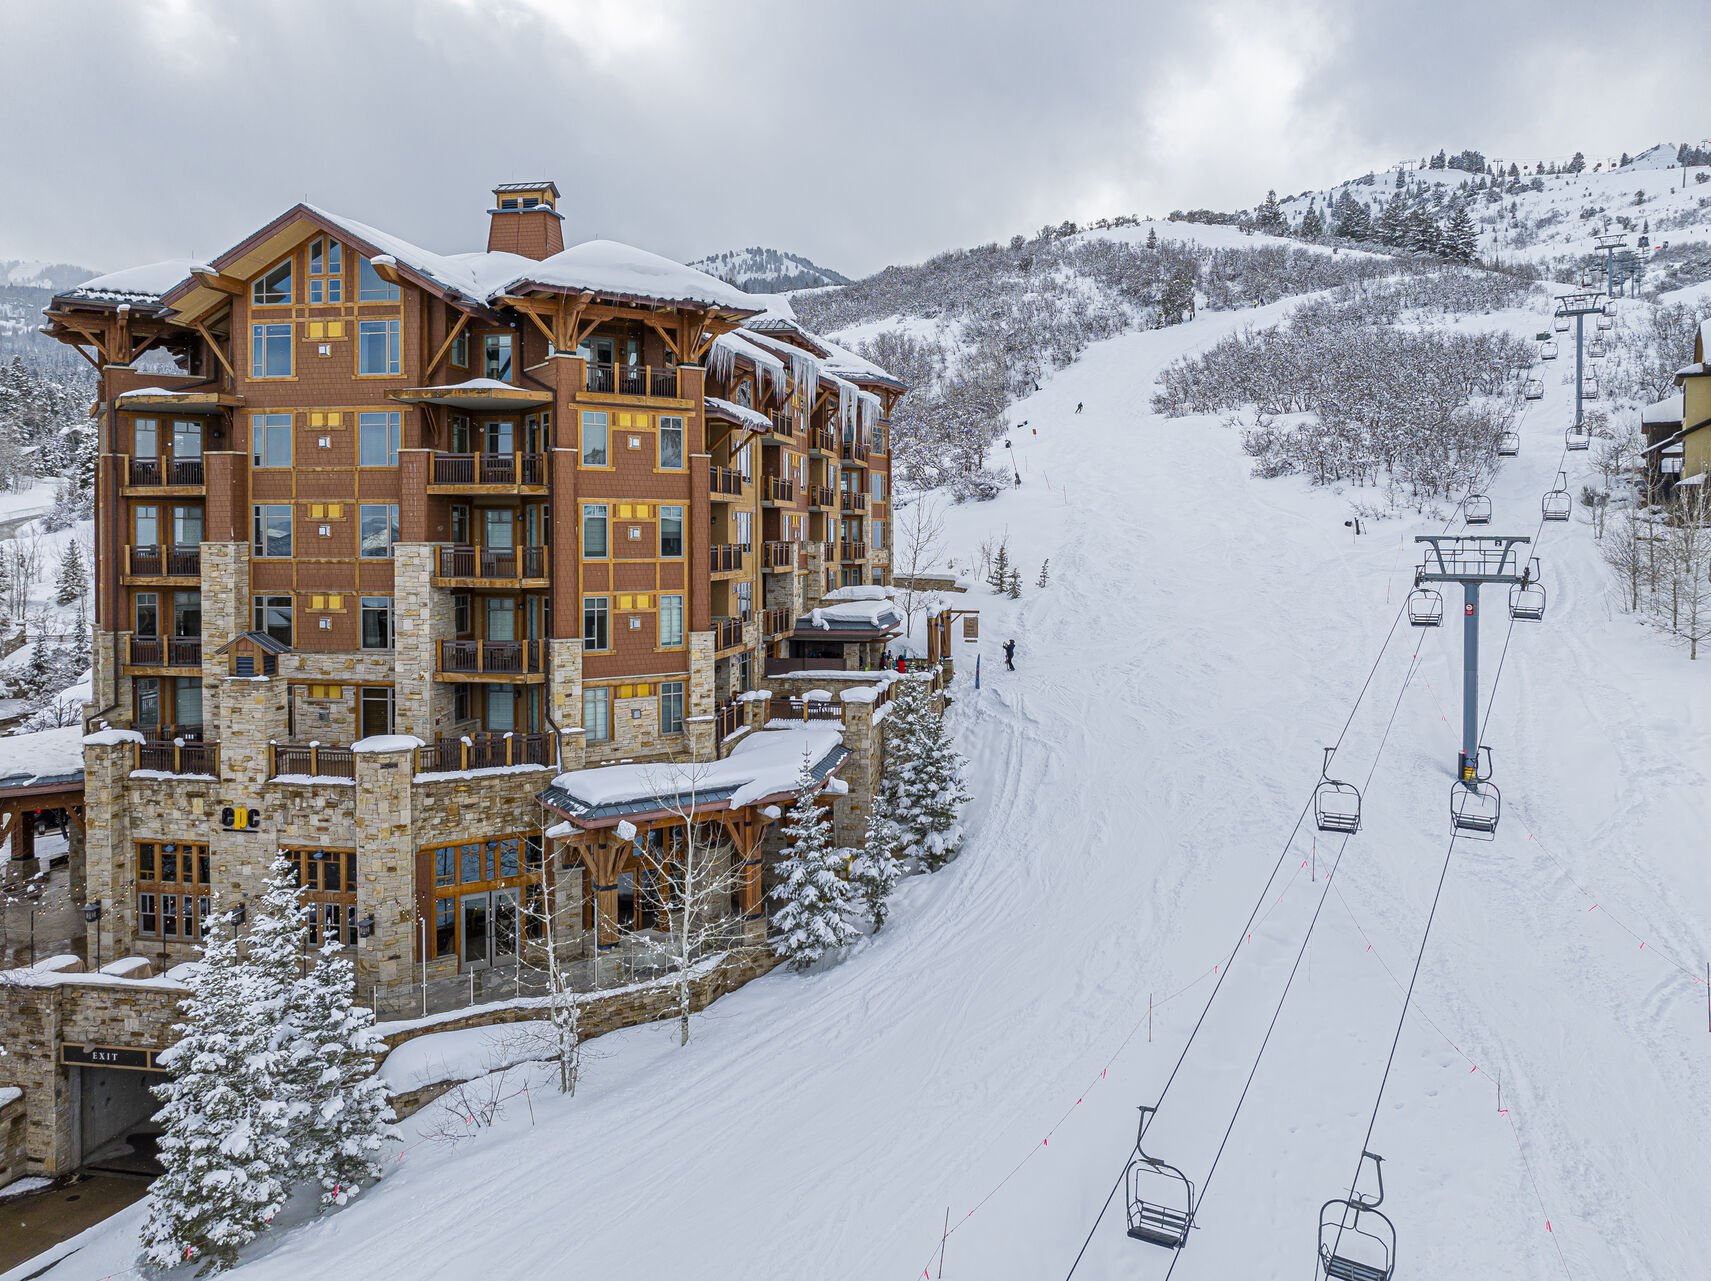 Ski-in/ski-out access with upscale amenities